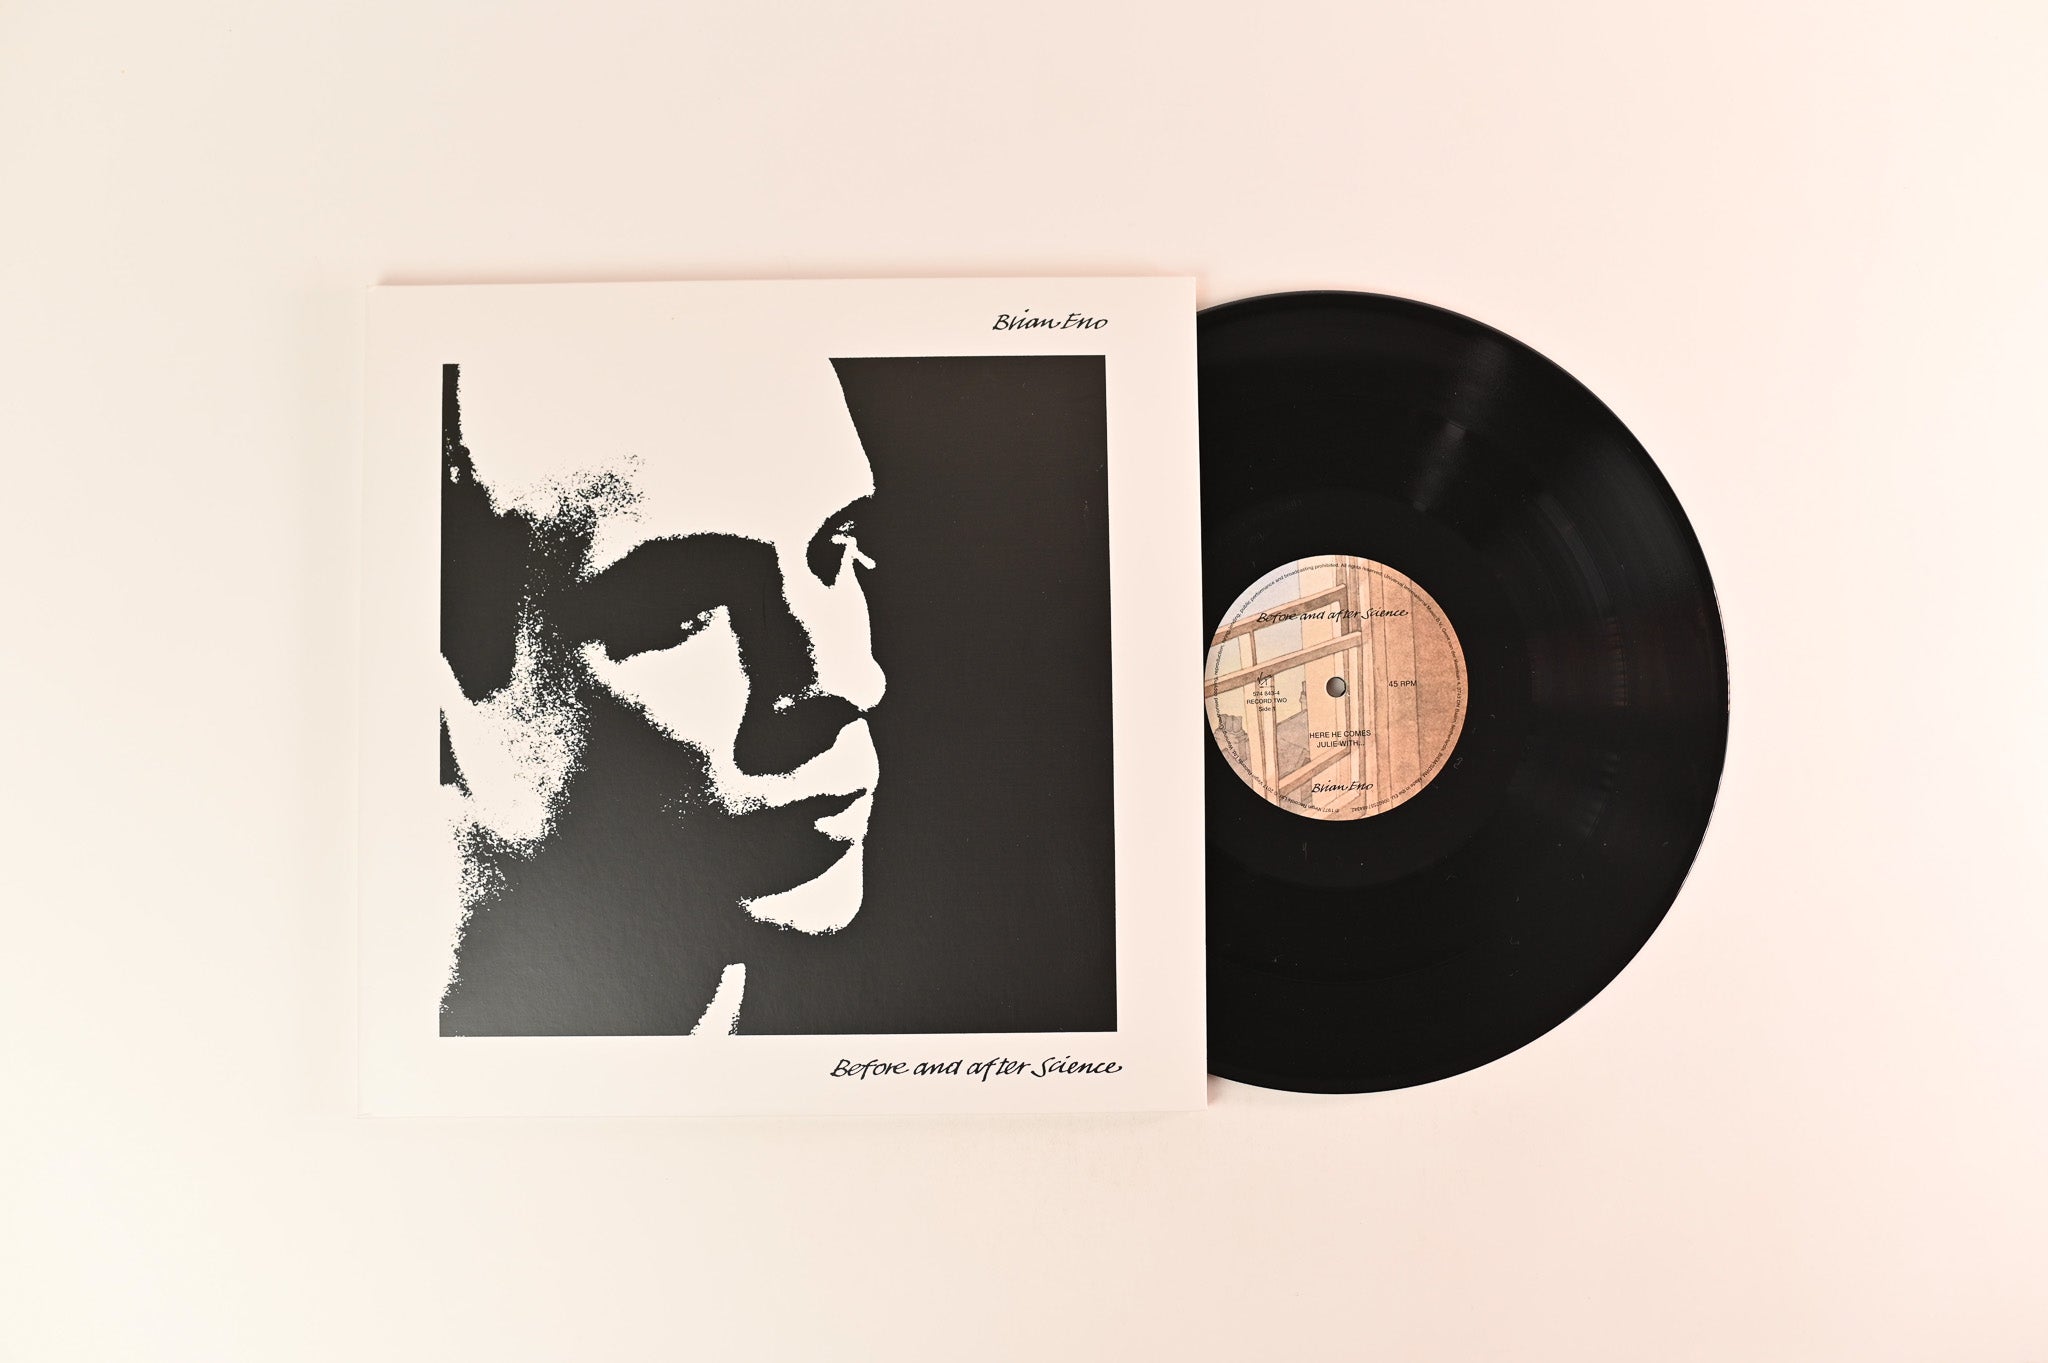 Brian Eno - Before And After Science on Virgin Ltd Half Speed Master 45 RPM Reissue